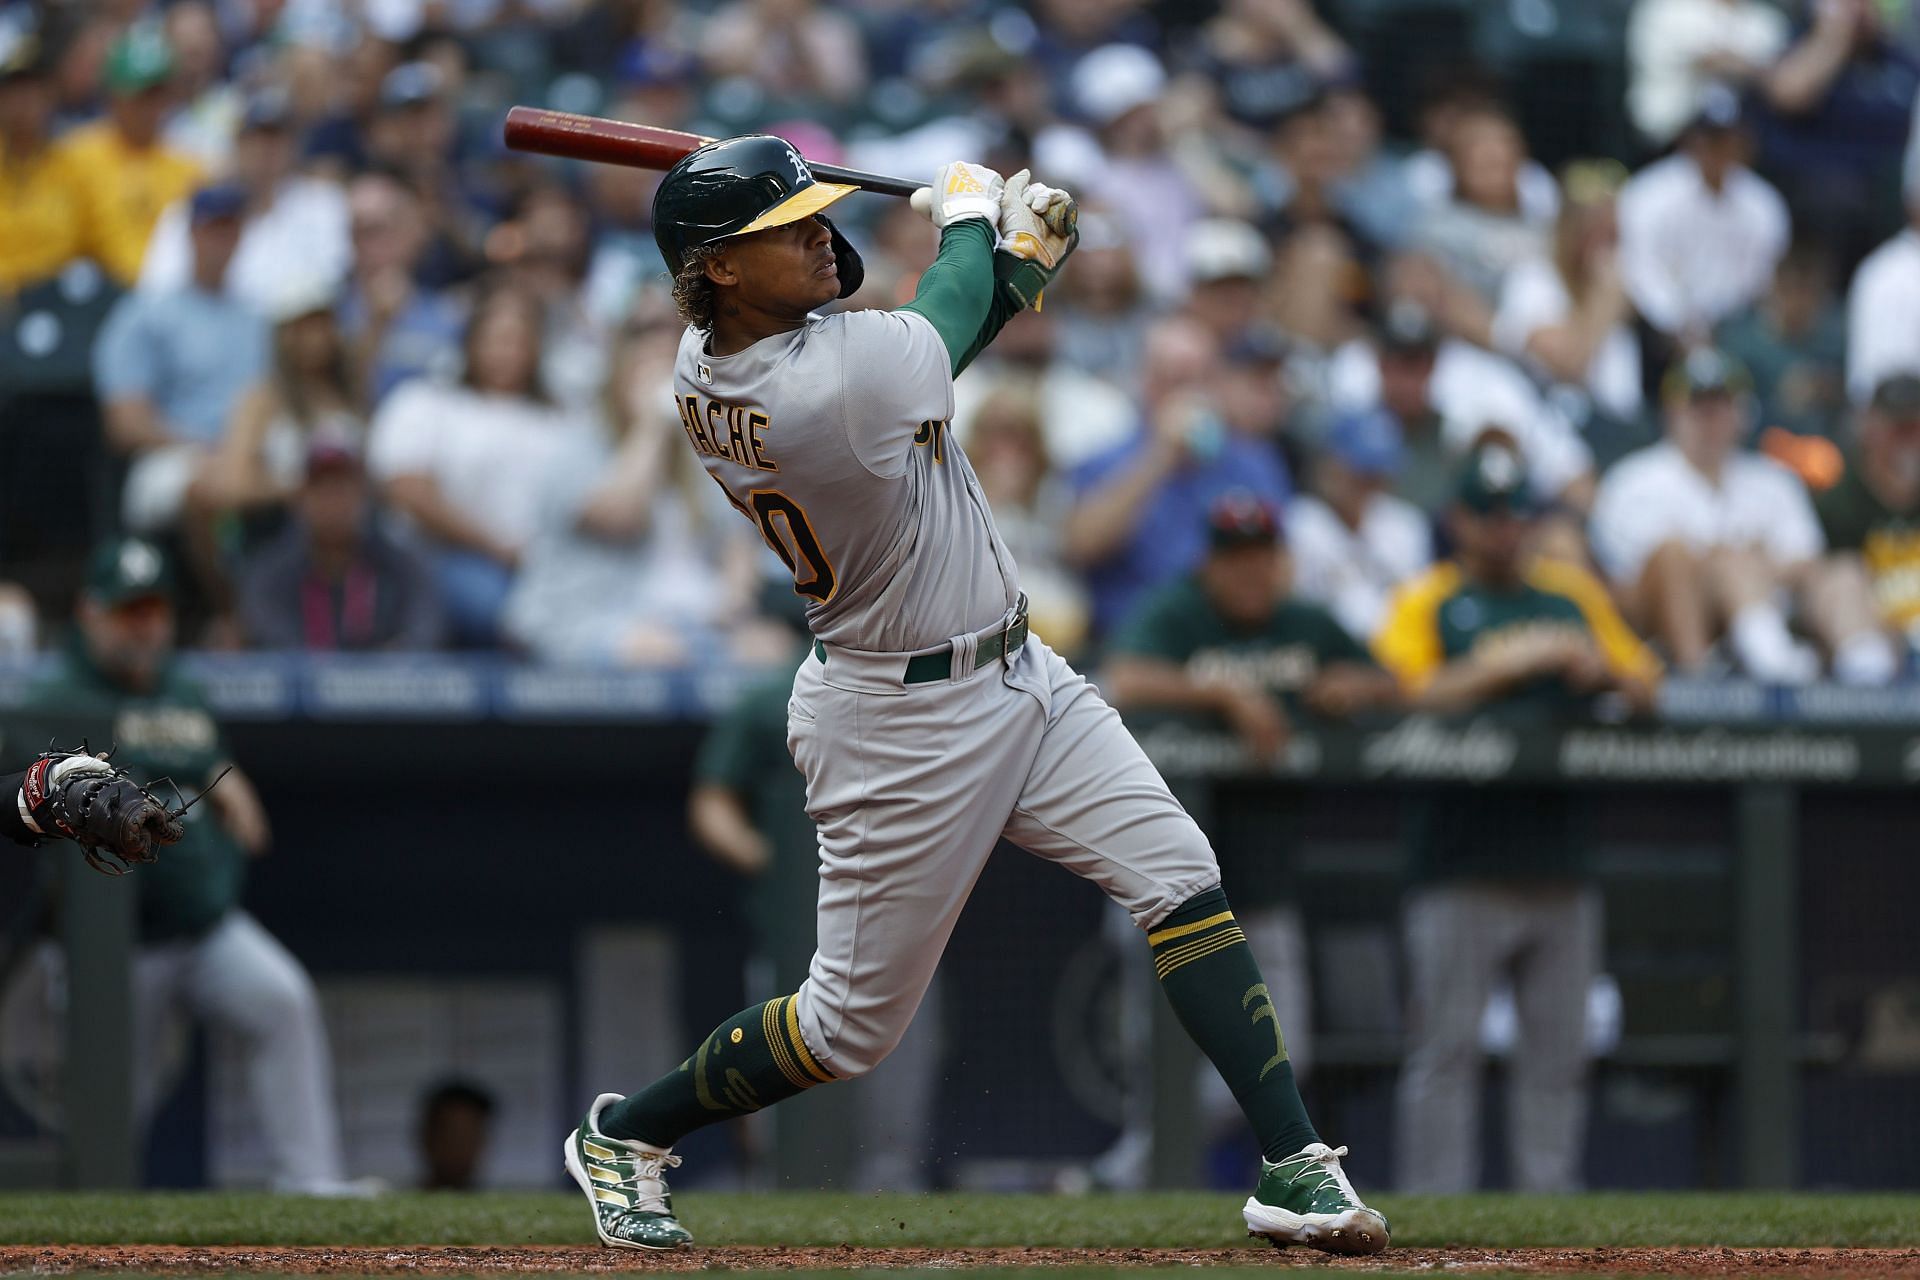 Cristian Pache of the Oakland Athletics at bat against the Seattle Mariners.